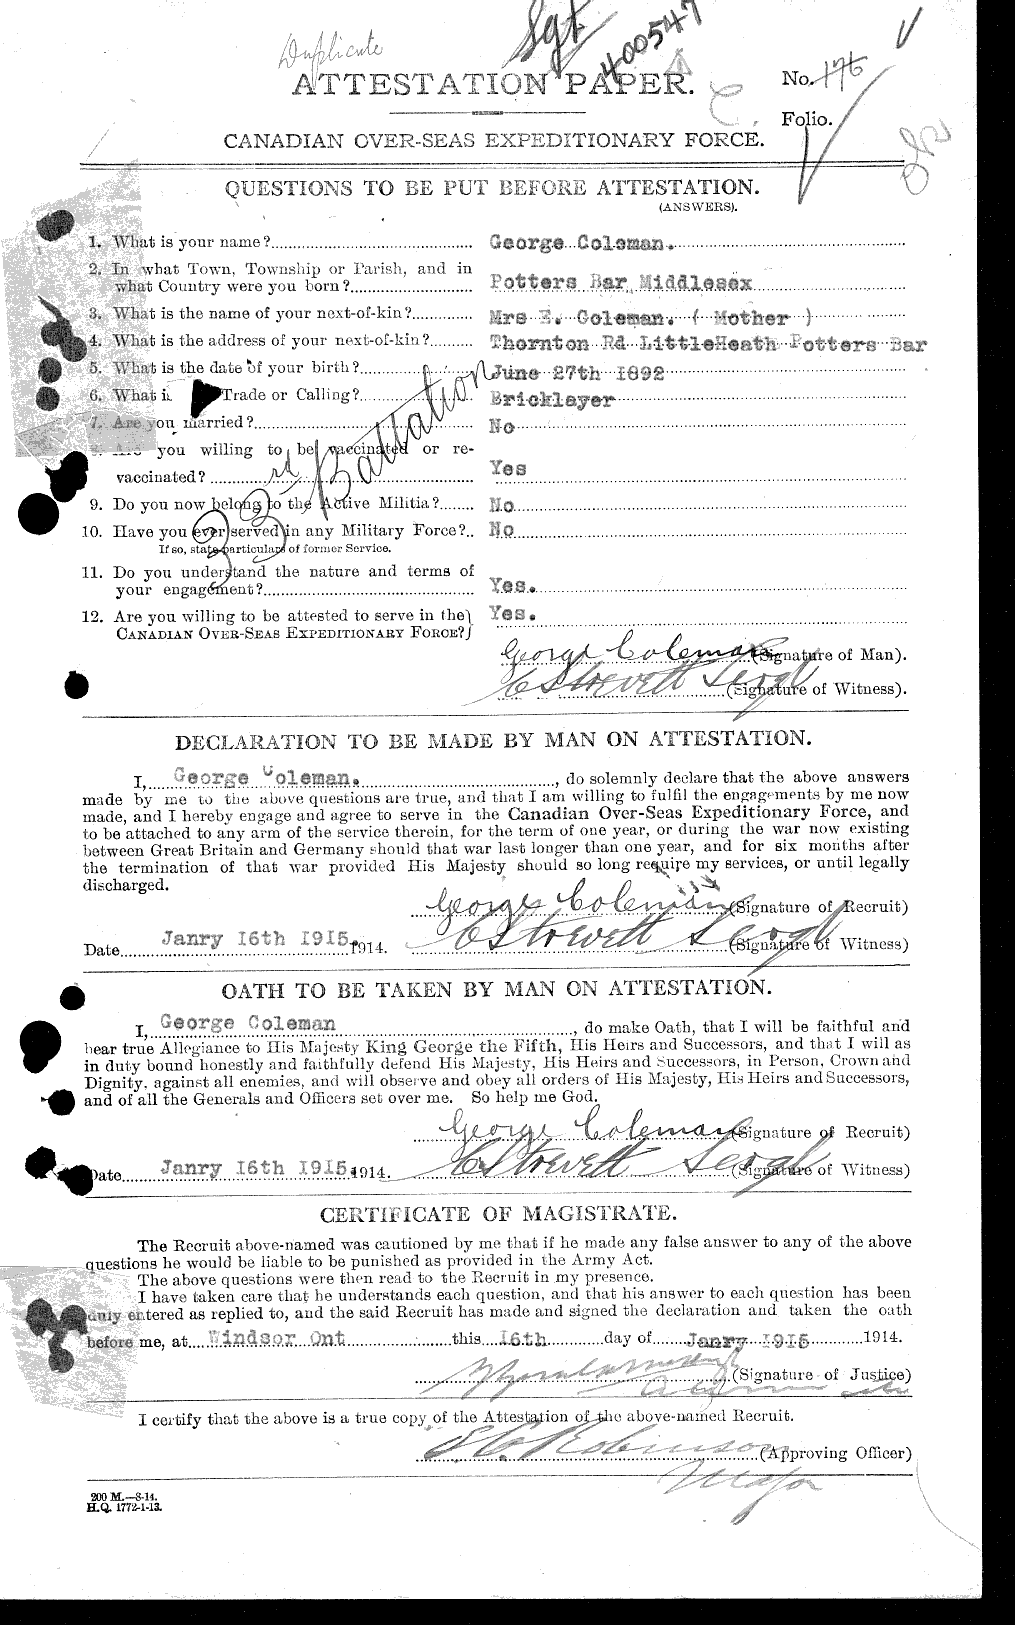 Personnel Records of the First World War - CEF 028146a